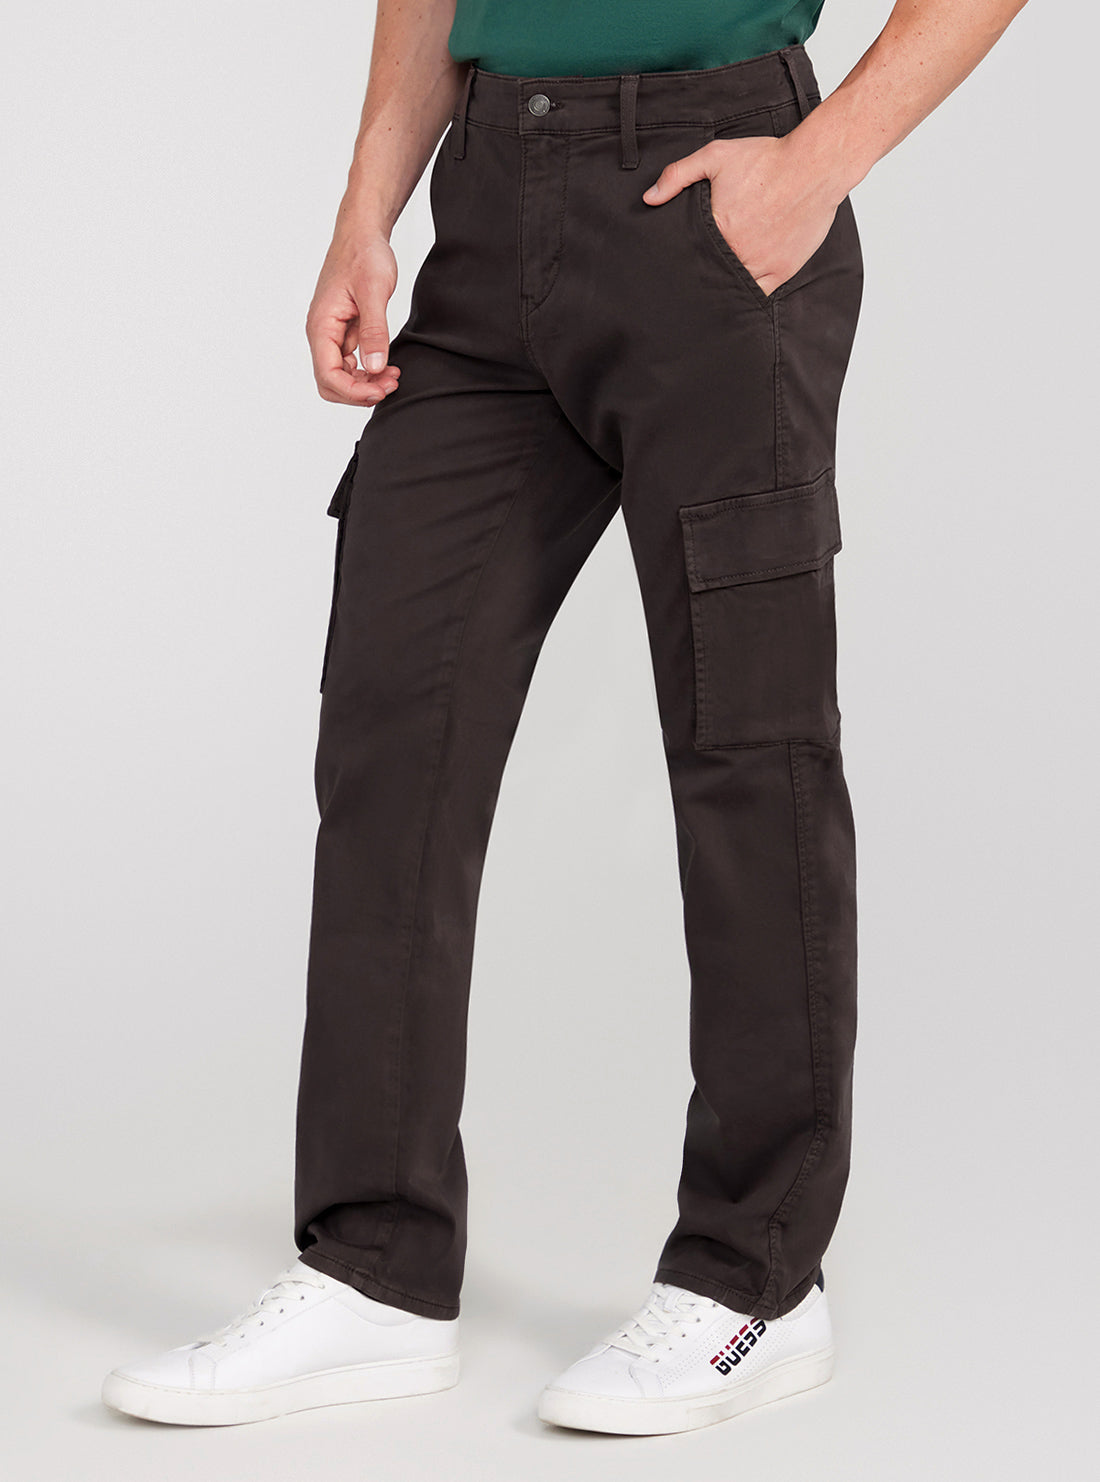 GUESS Brown Sateen Coated Cargo Pants side view